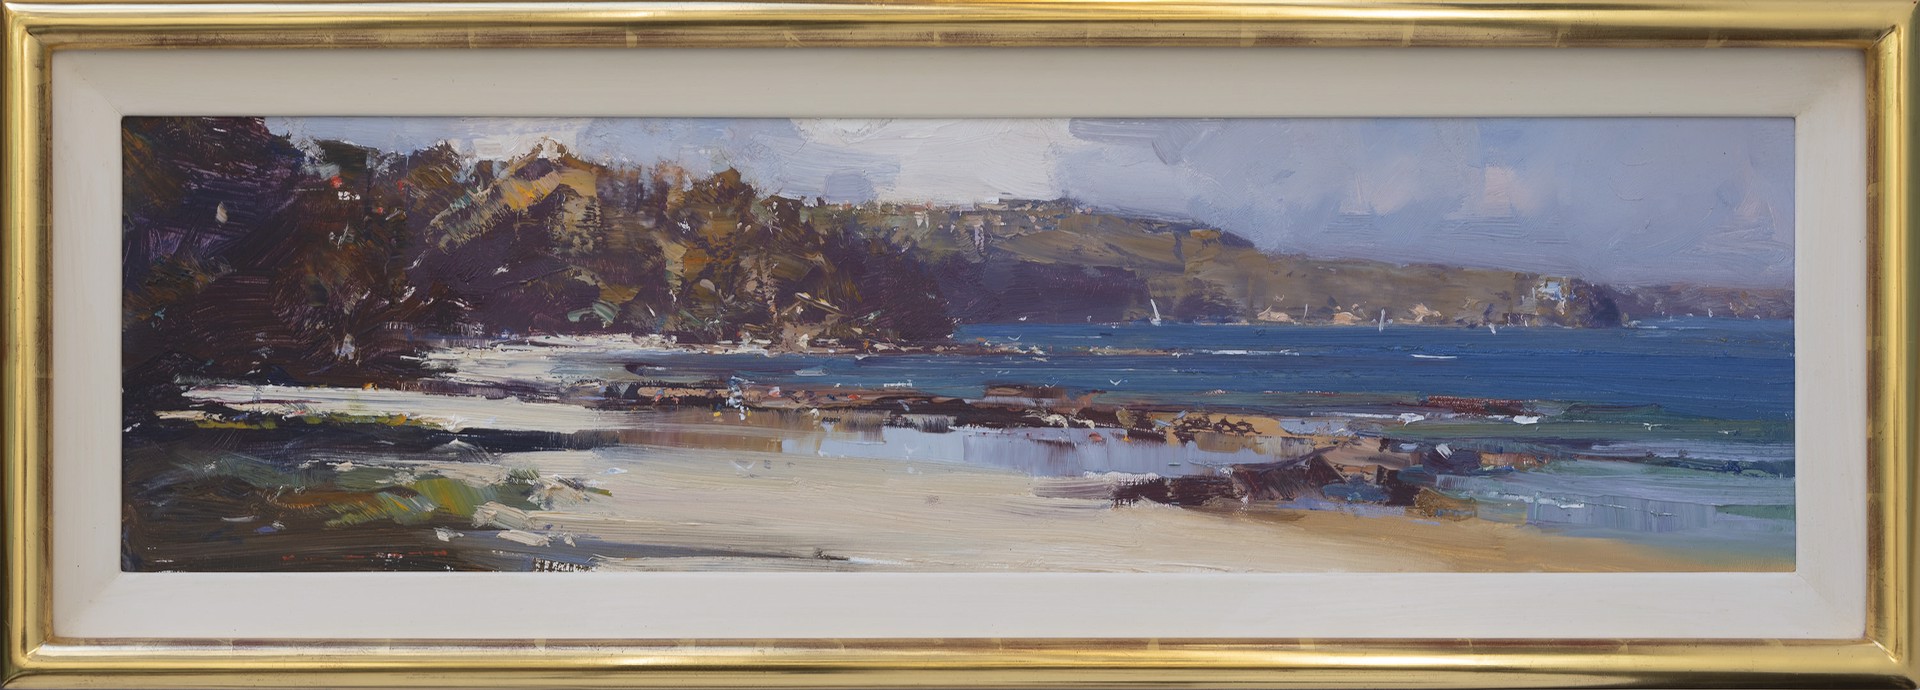 The North Easter, Balmoral Beach by Ken Knight